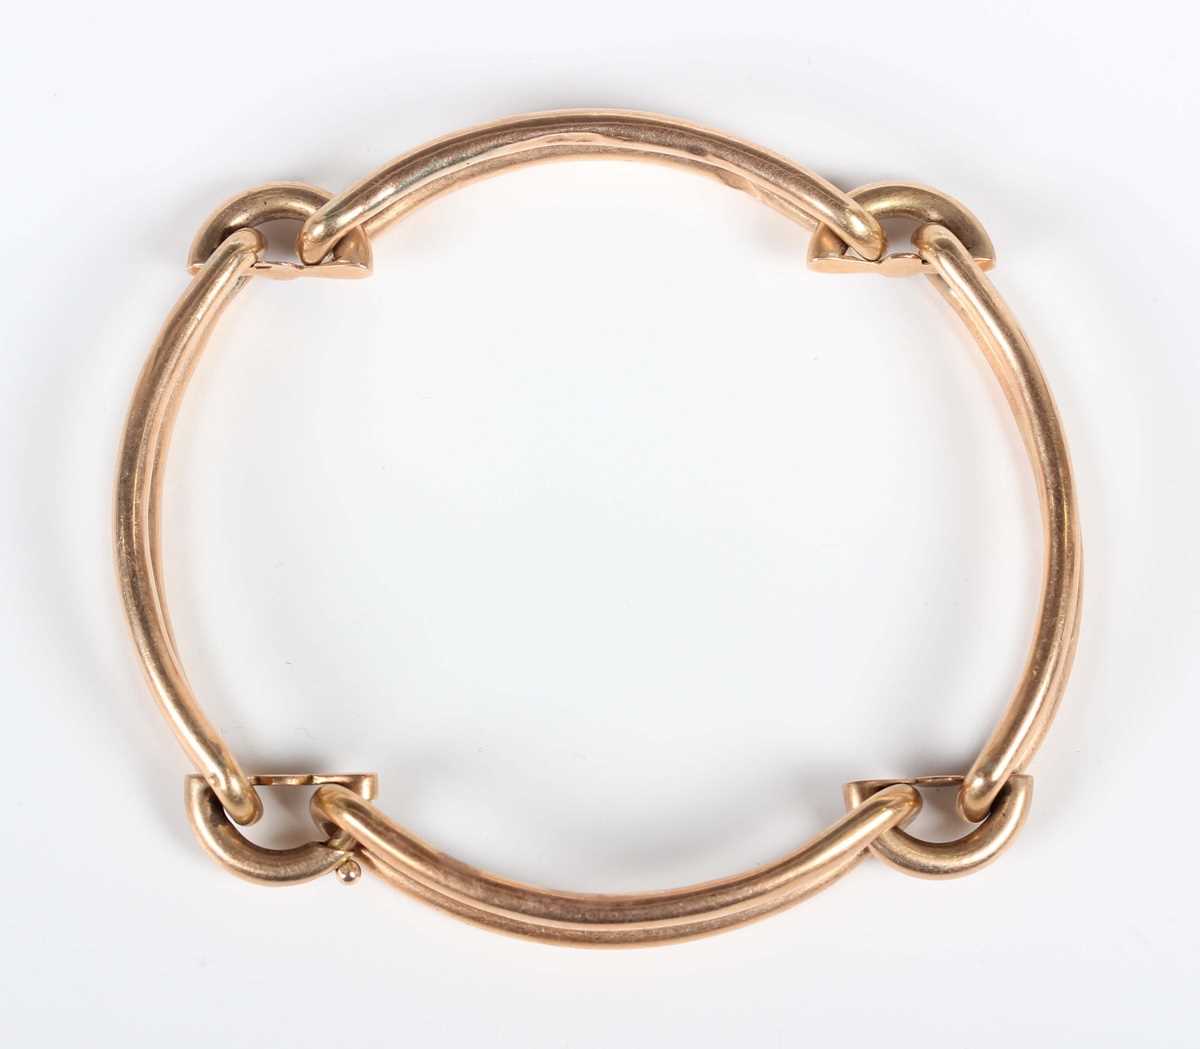 An Austro-Hungarian gold bracelet in a four section bar link design, on a sprung clasp, weight 13. - Image 2 of 3